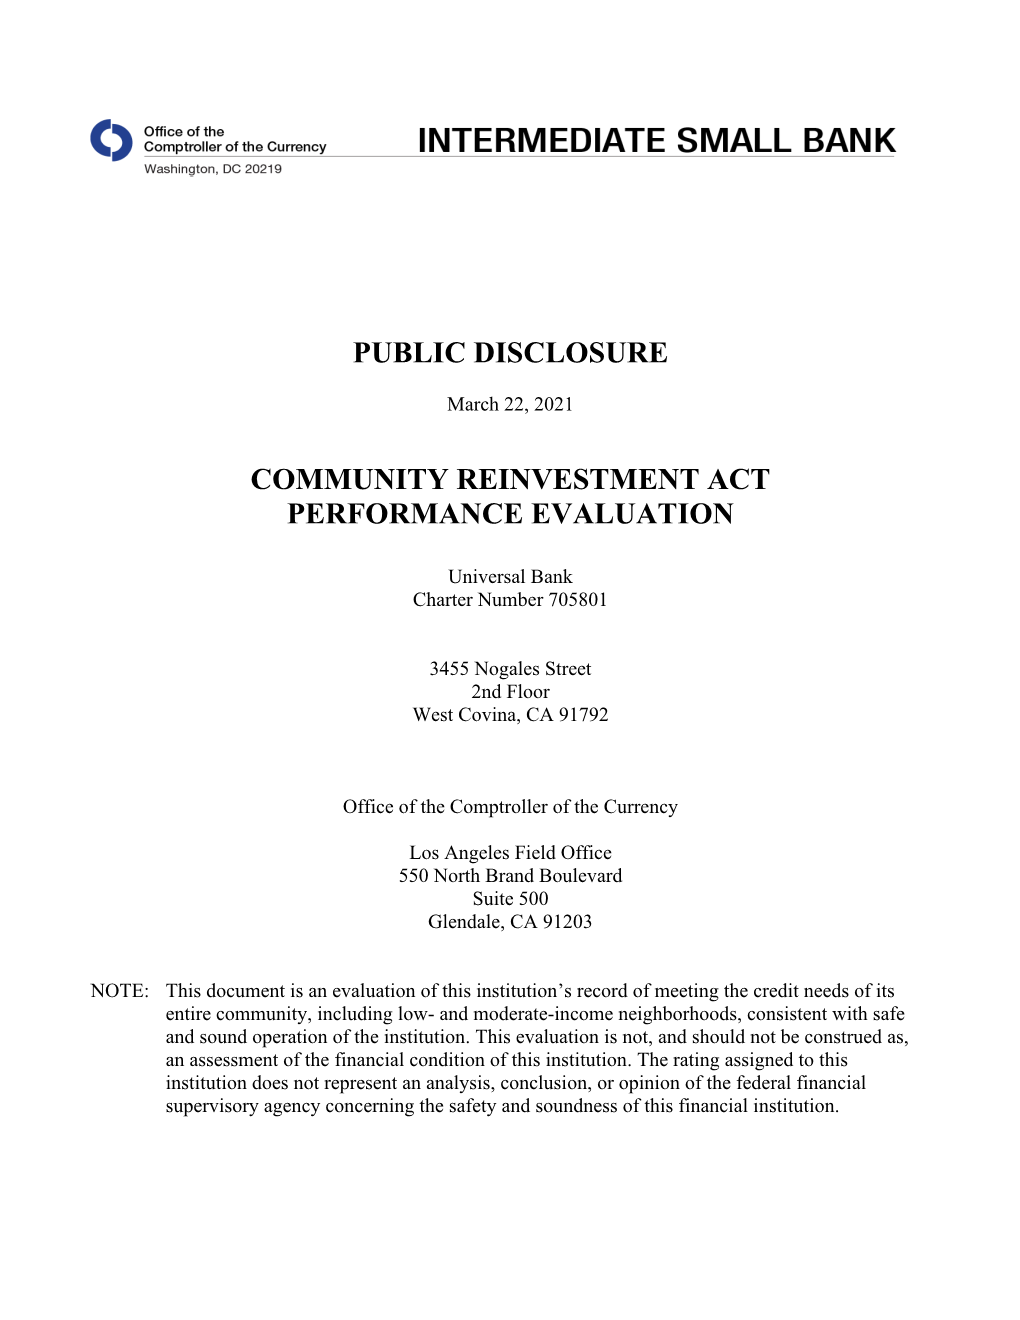 Community Reinvestment Act Performance Evaluation Charter No. 705801